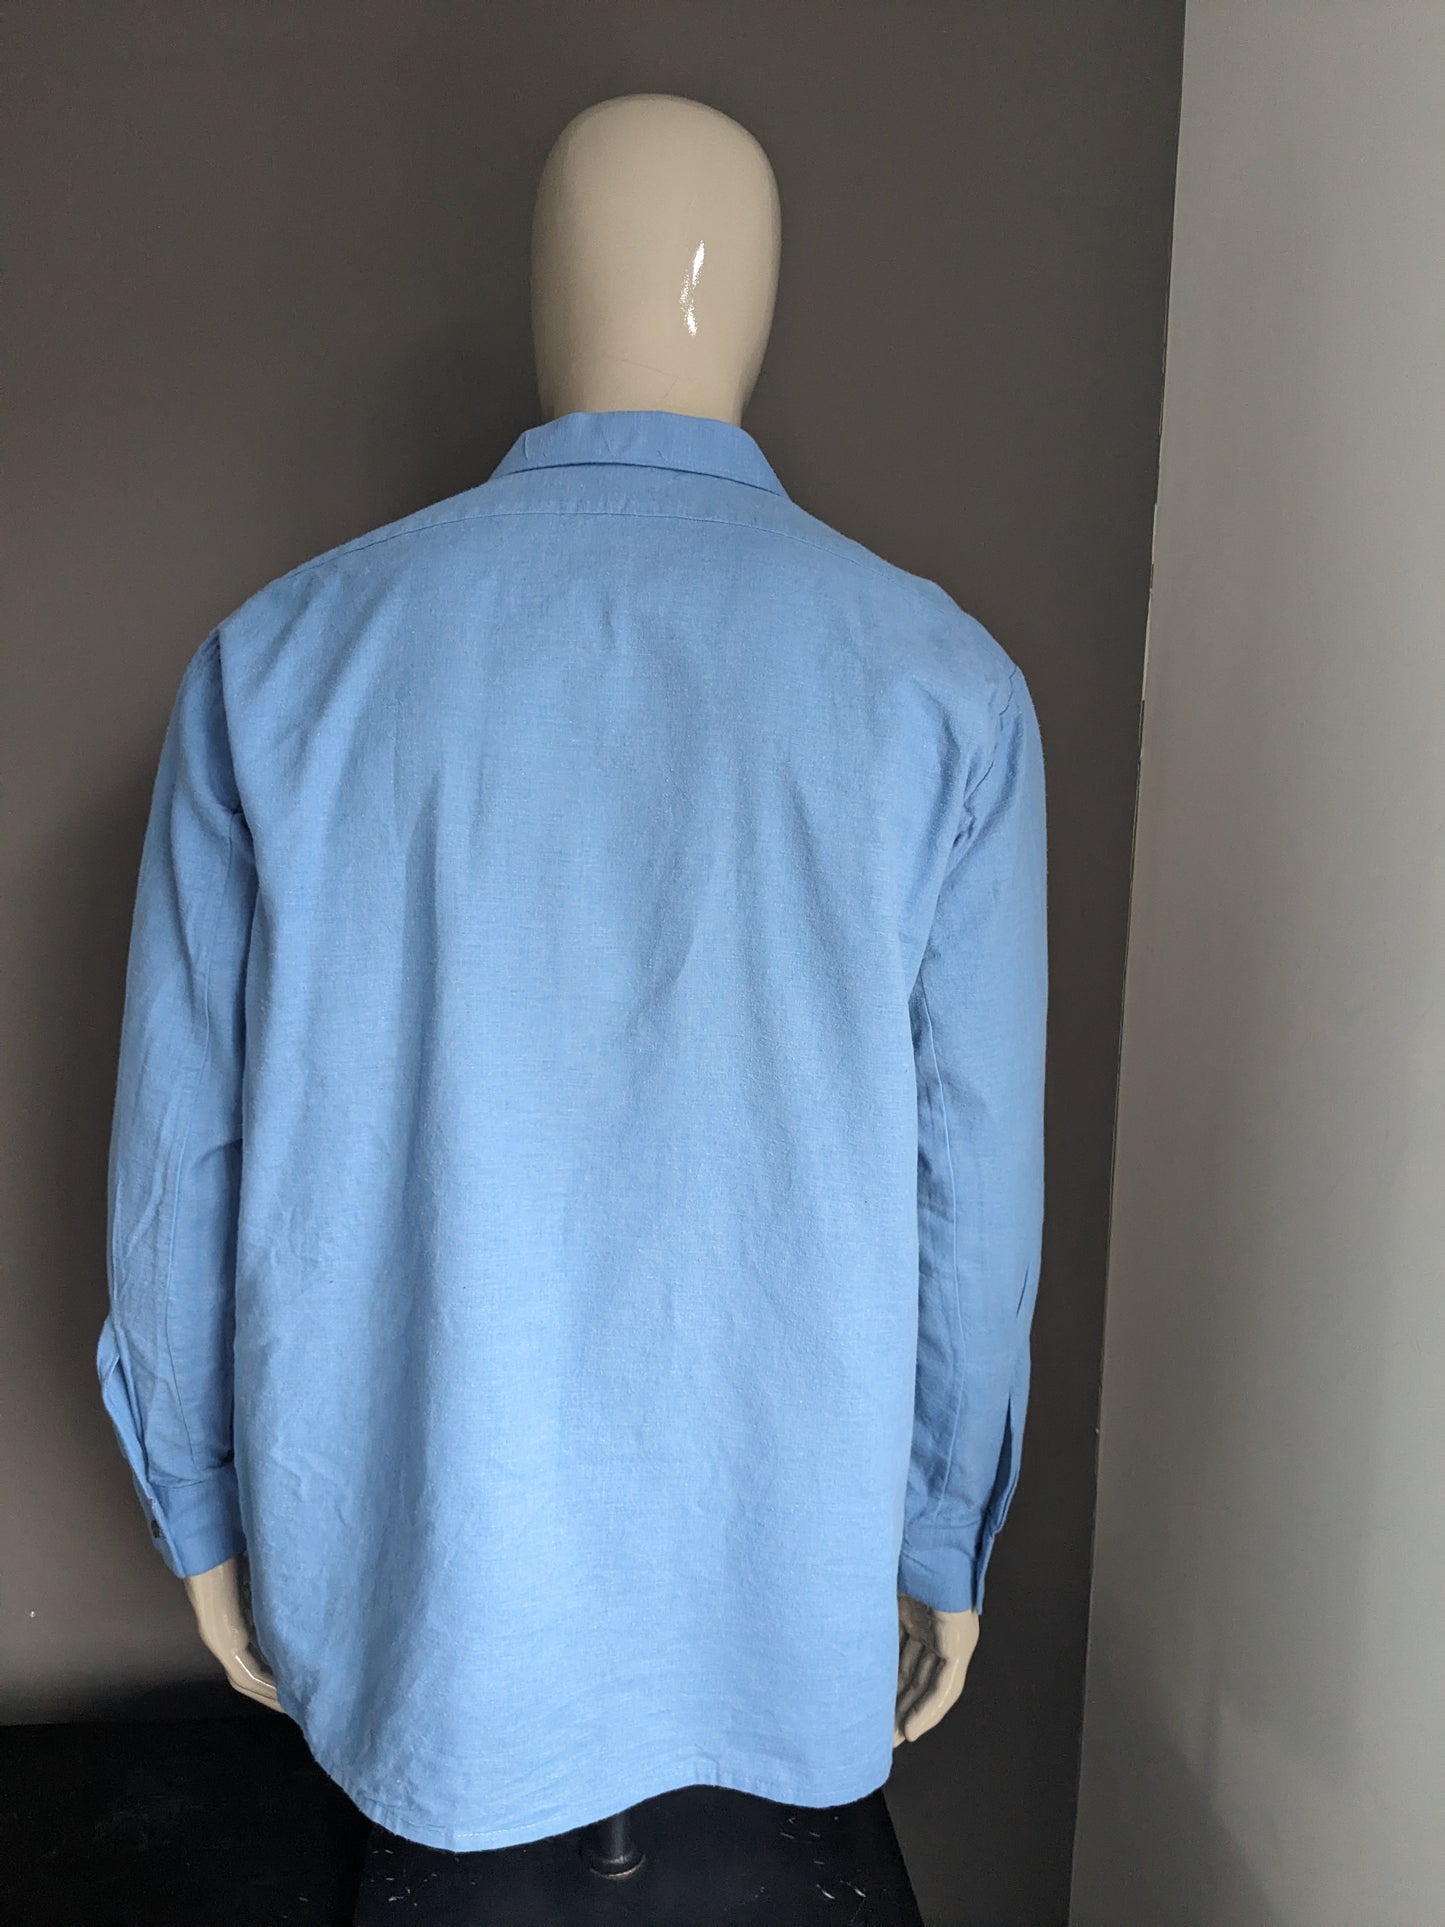 Vintage 70's shirt with point collar. Blue colored. Size 2XL / XXL.